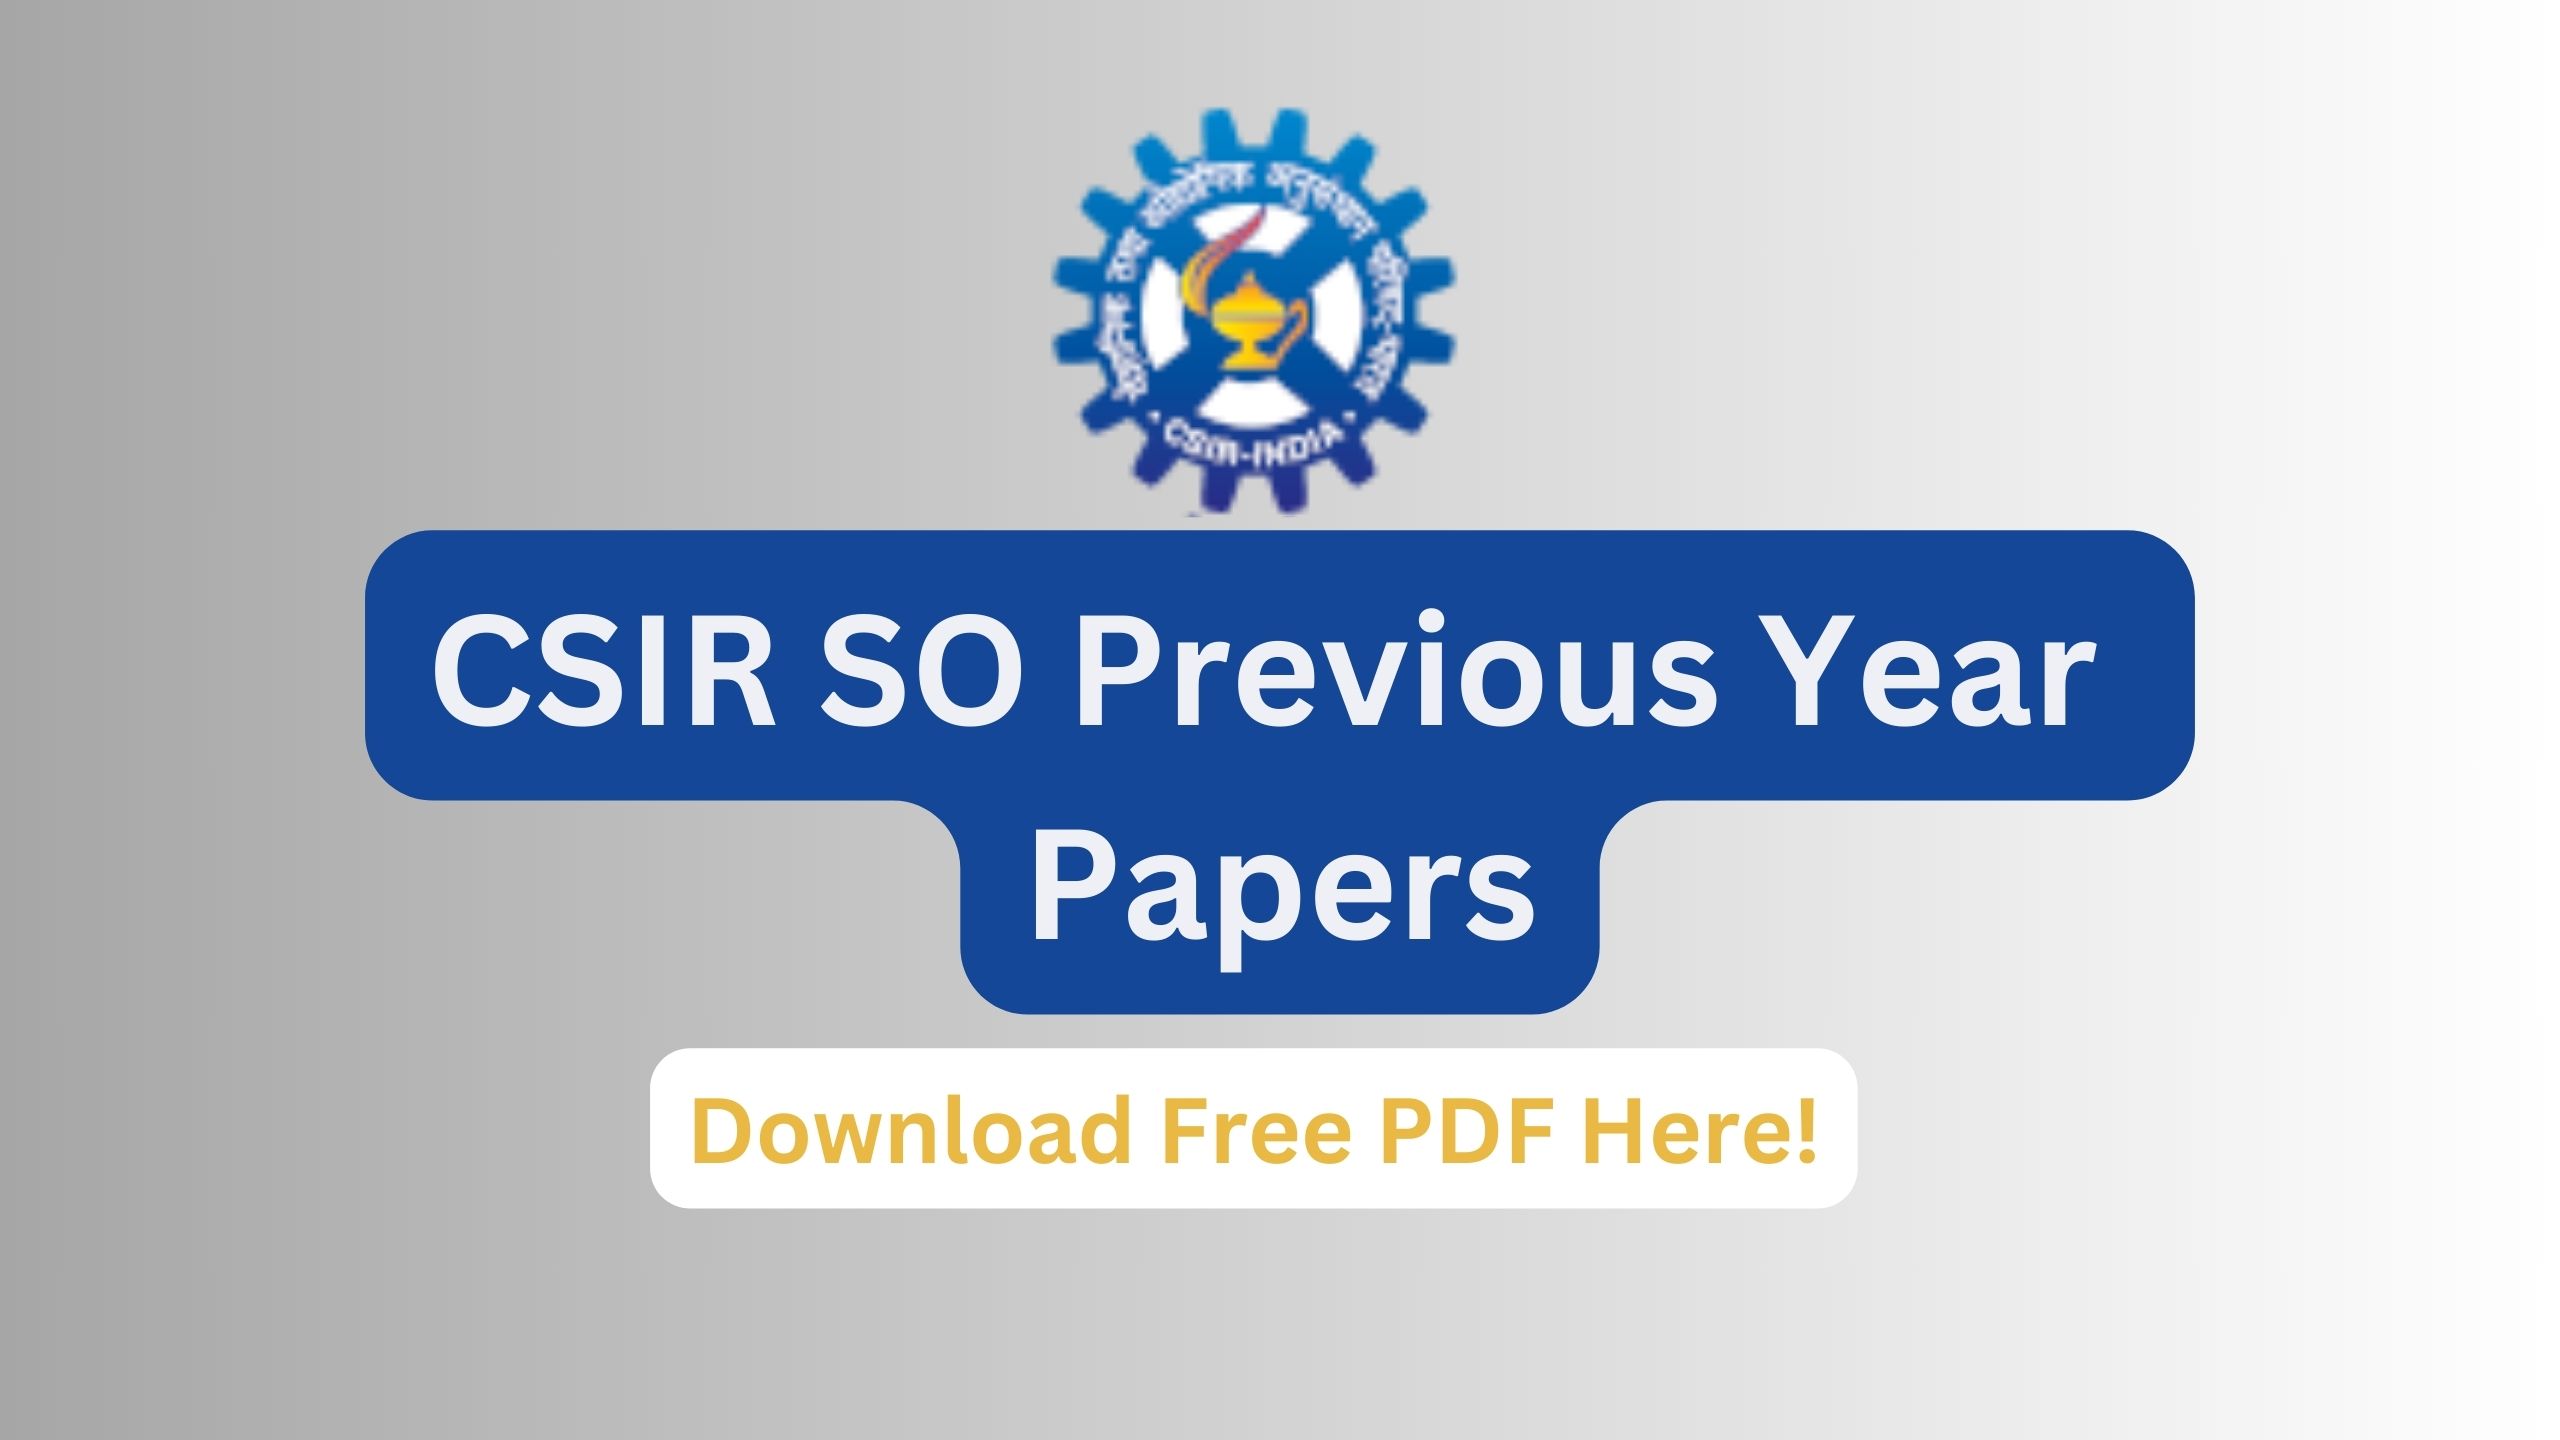 CSIR SO Previous Year Papers, Download 2013 Question Paper!